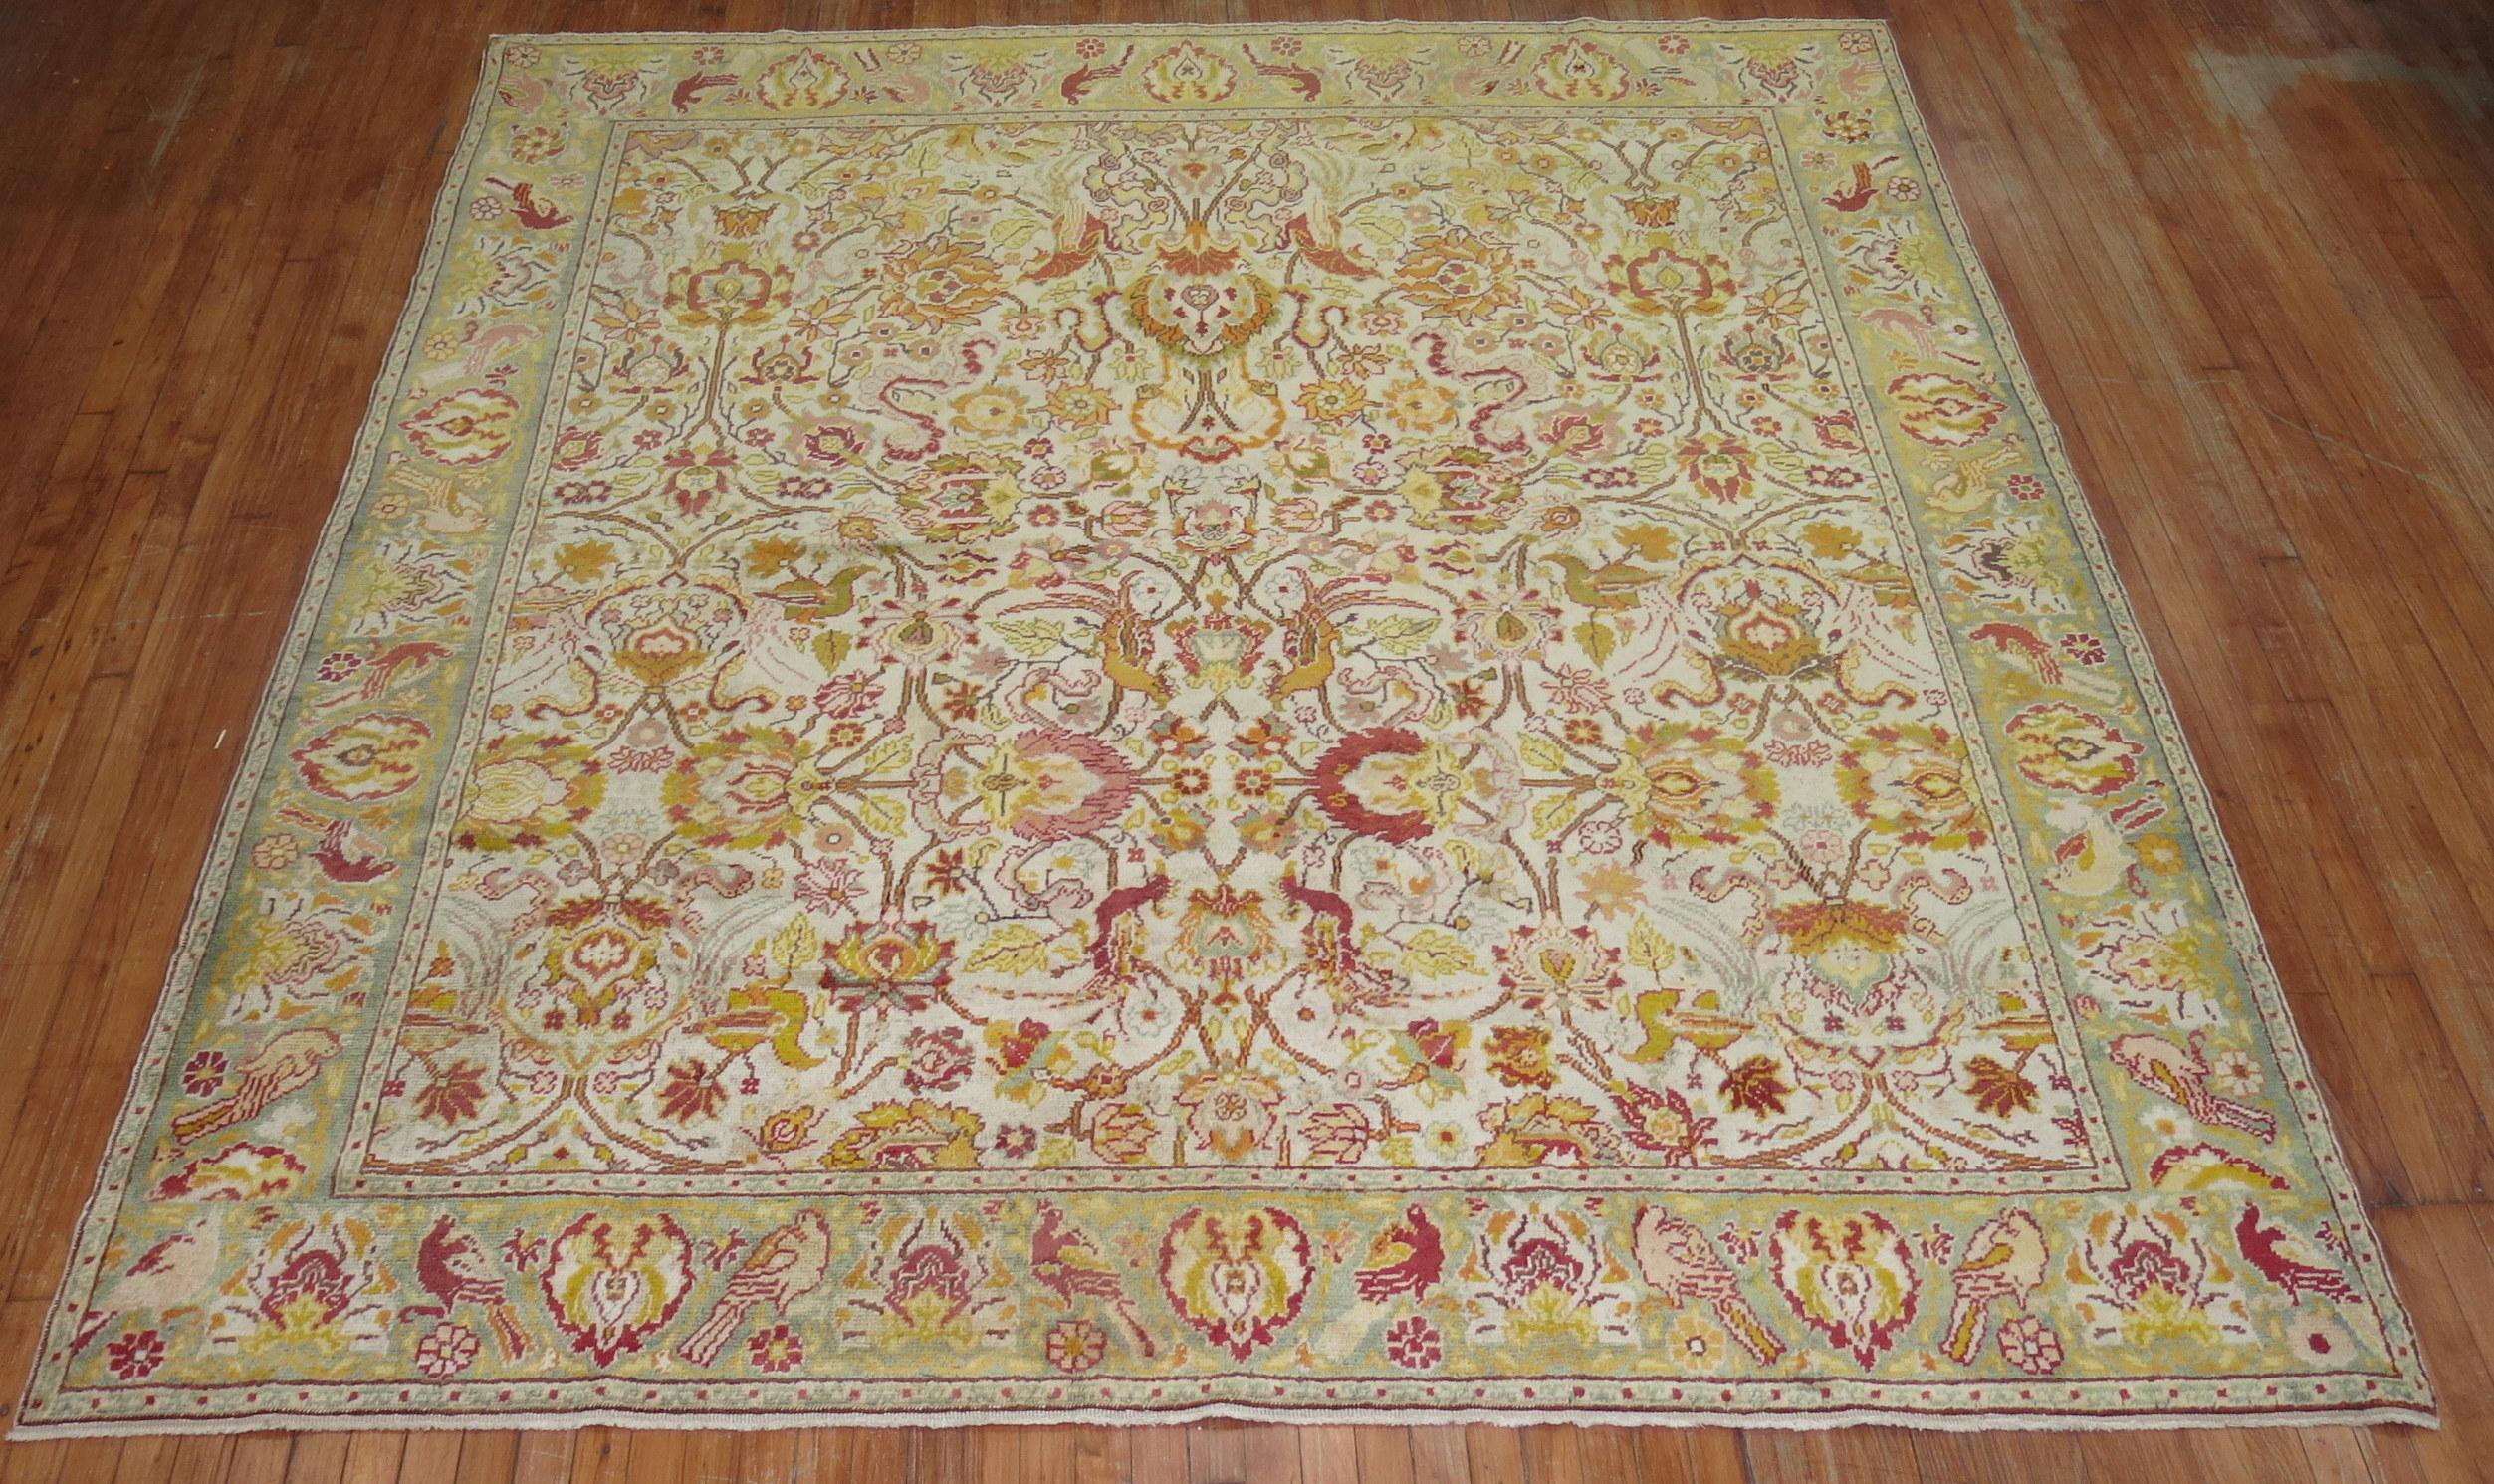 Pictorial Motif Ivory Turkish Square Room Size Rug 1